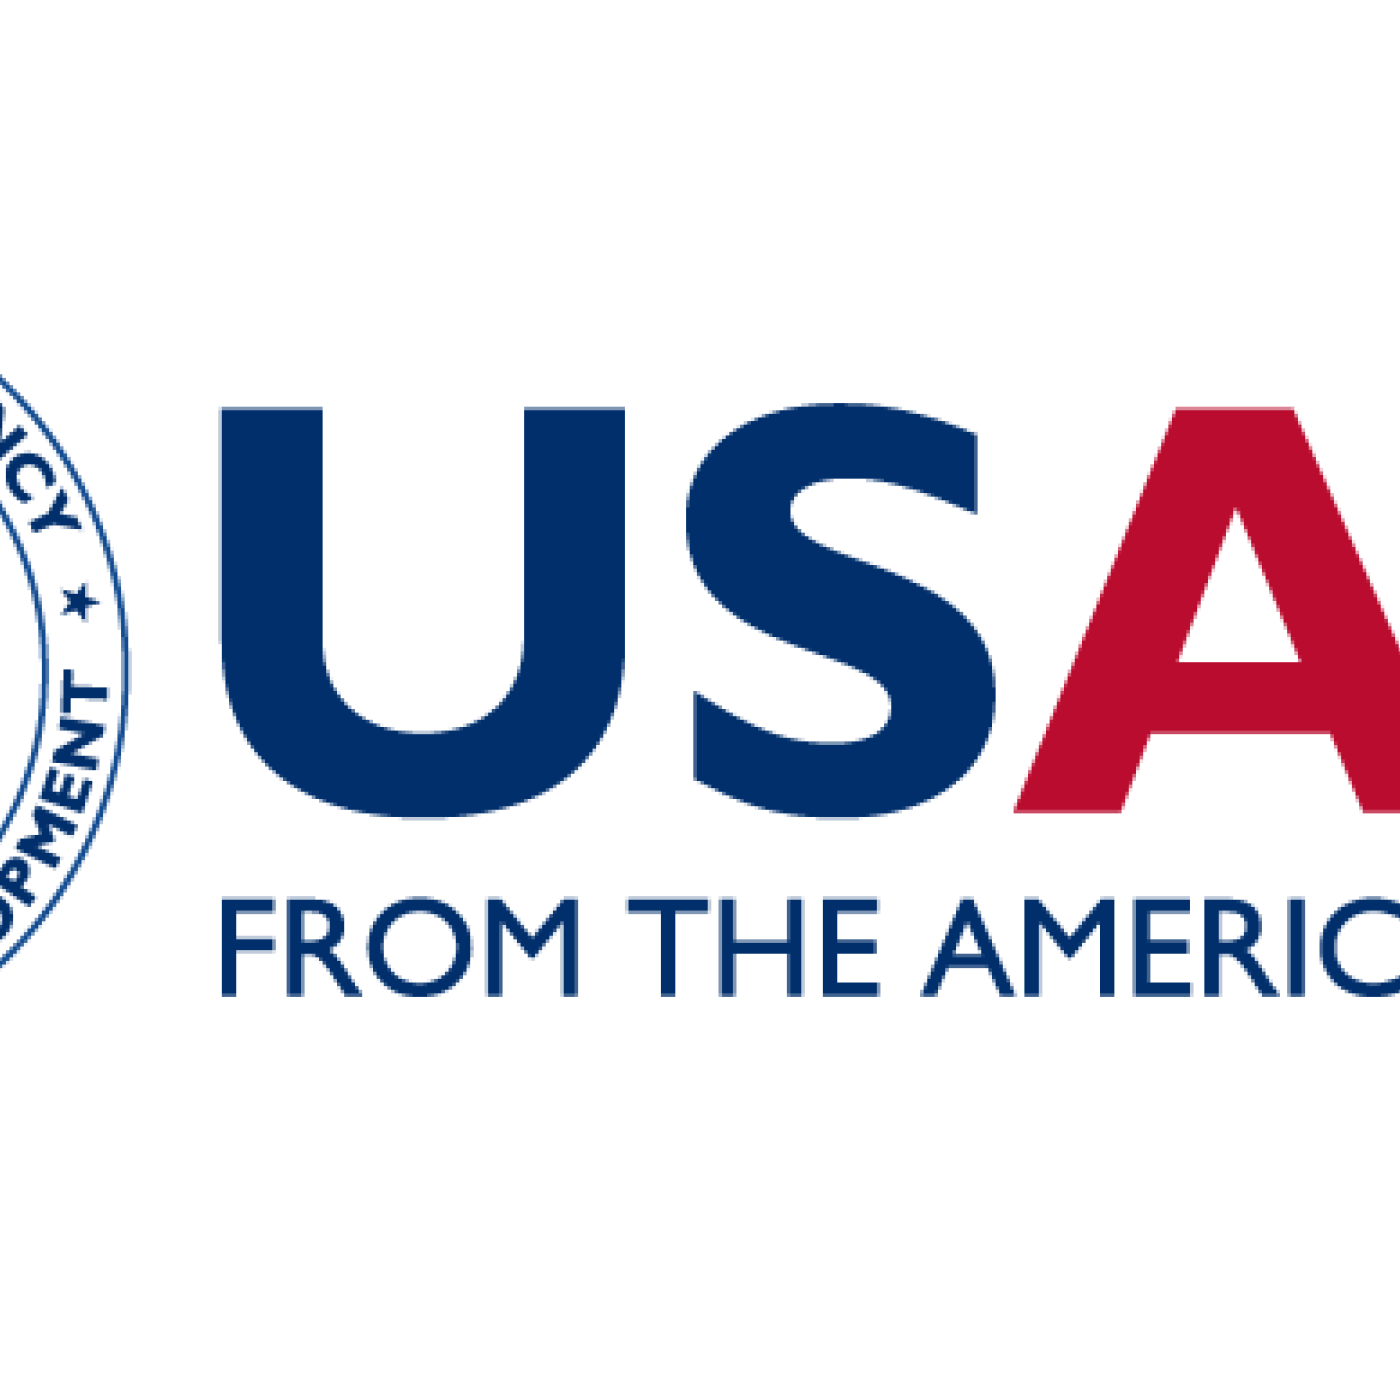 USAID logo in color